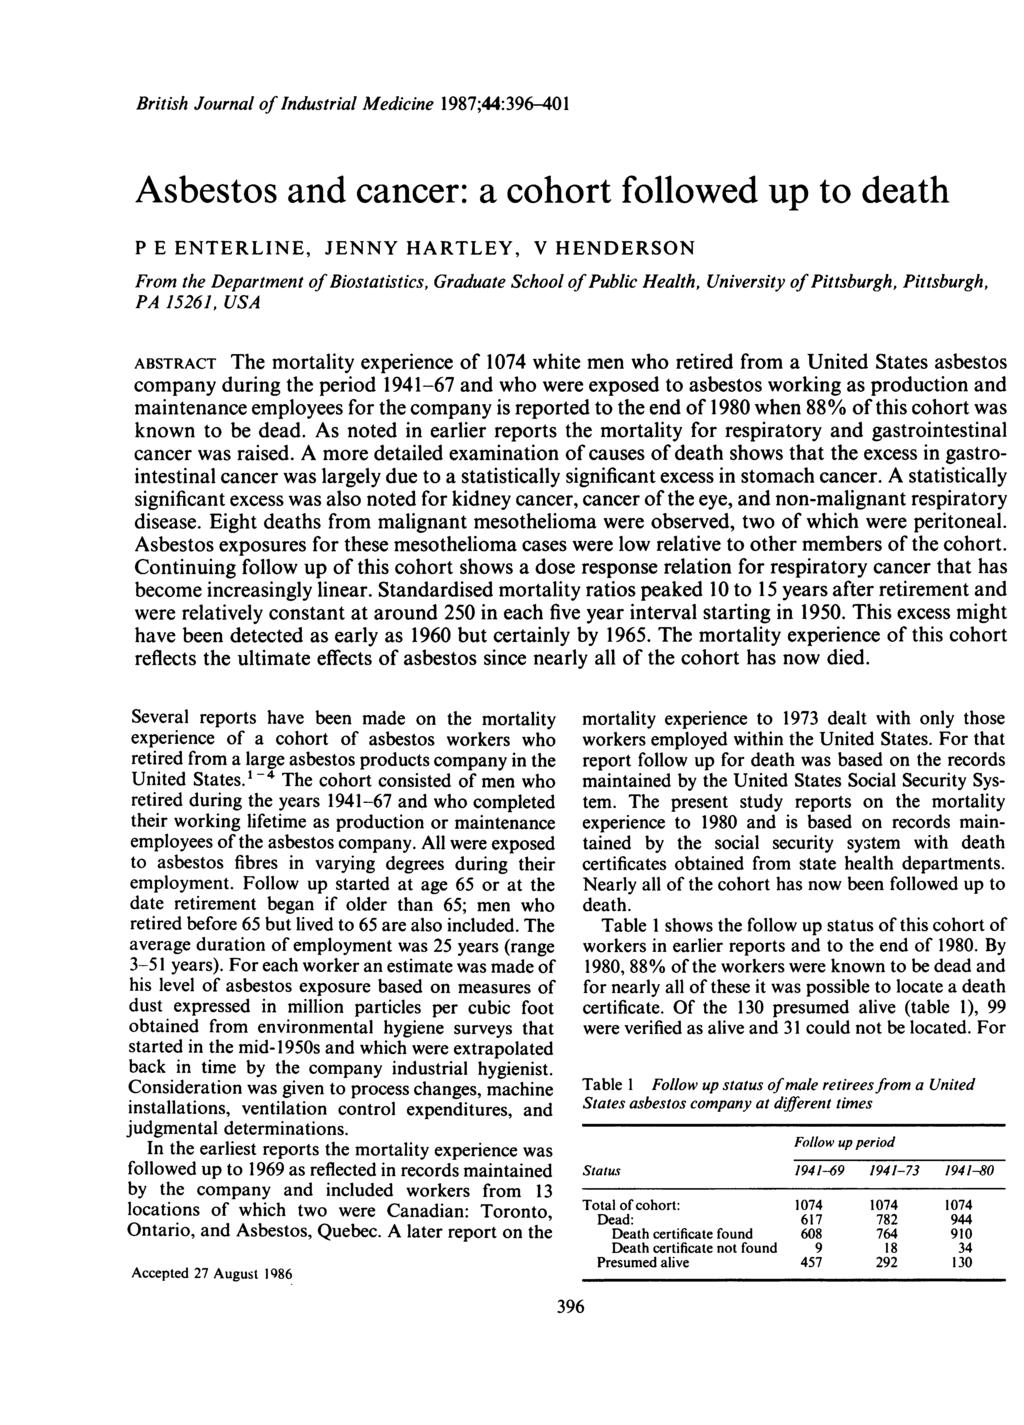 British Journal of Industrial Medicine 1987;44:396-401 Asbestos and cancer: a cohort followed up to death P E ENTERLINE, JENNY HARTLEY, V HENDERSON From the Department of Biostatistics, Graduate